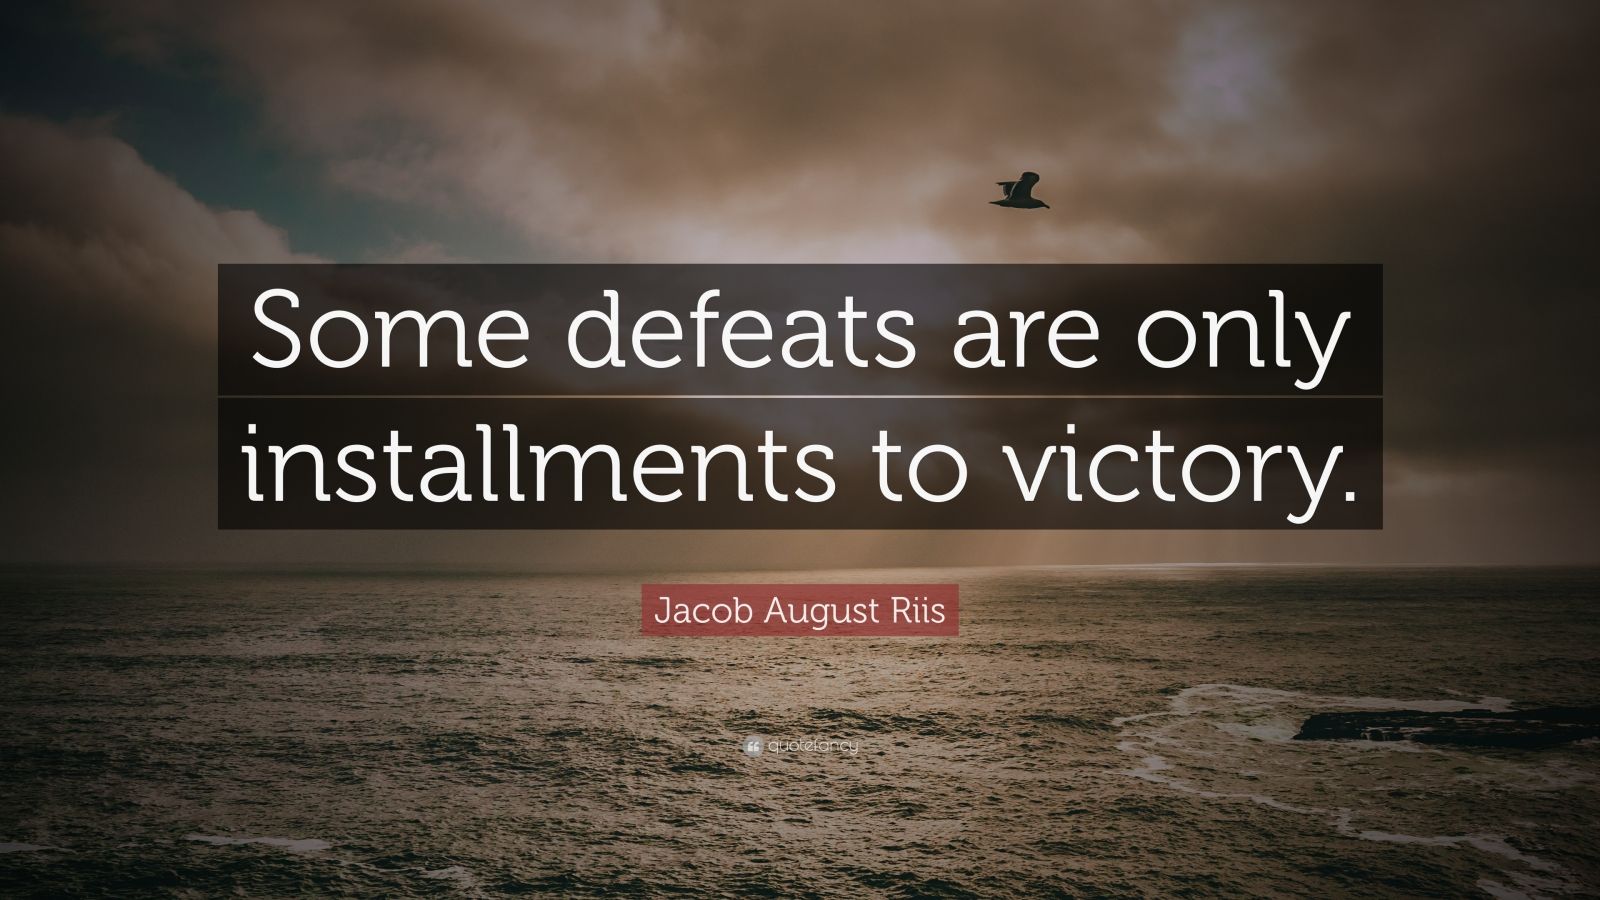 Top 6 Jacob August Riis Quotes | 2021 Edition | Free Images - QuoteFancy